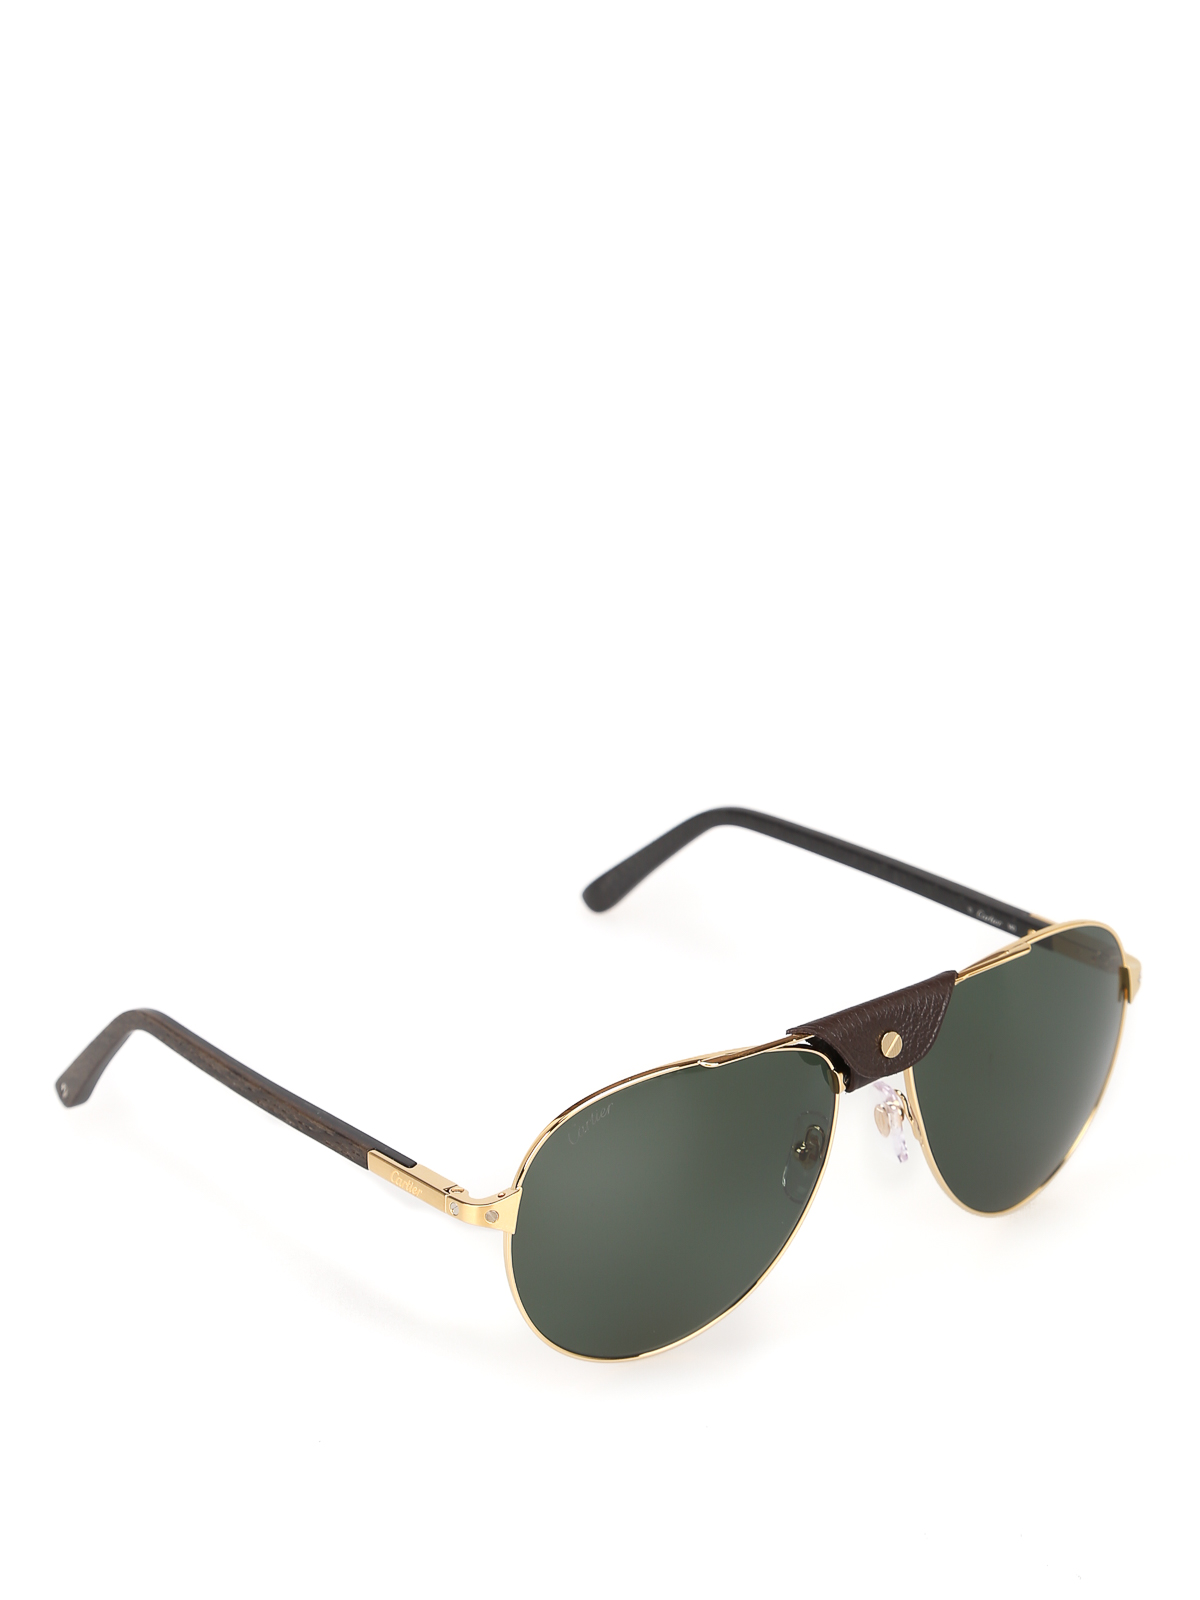 CARTIER AVIATOR SUNGLASSES WITH LEATHER INSERT